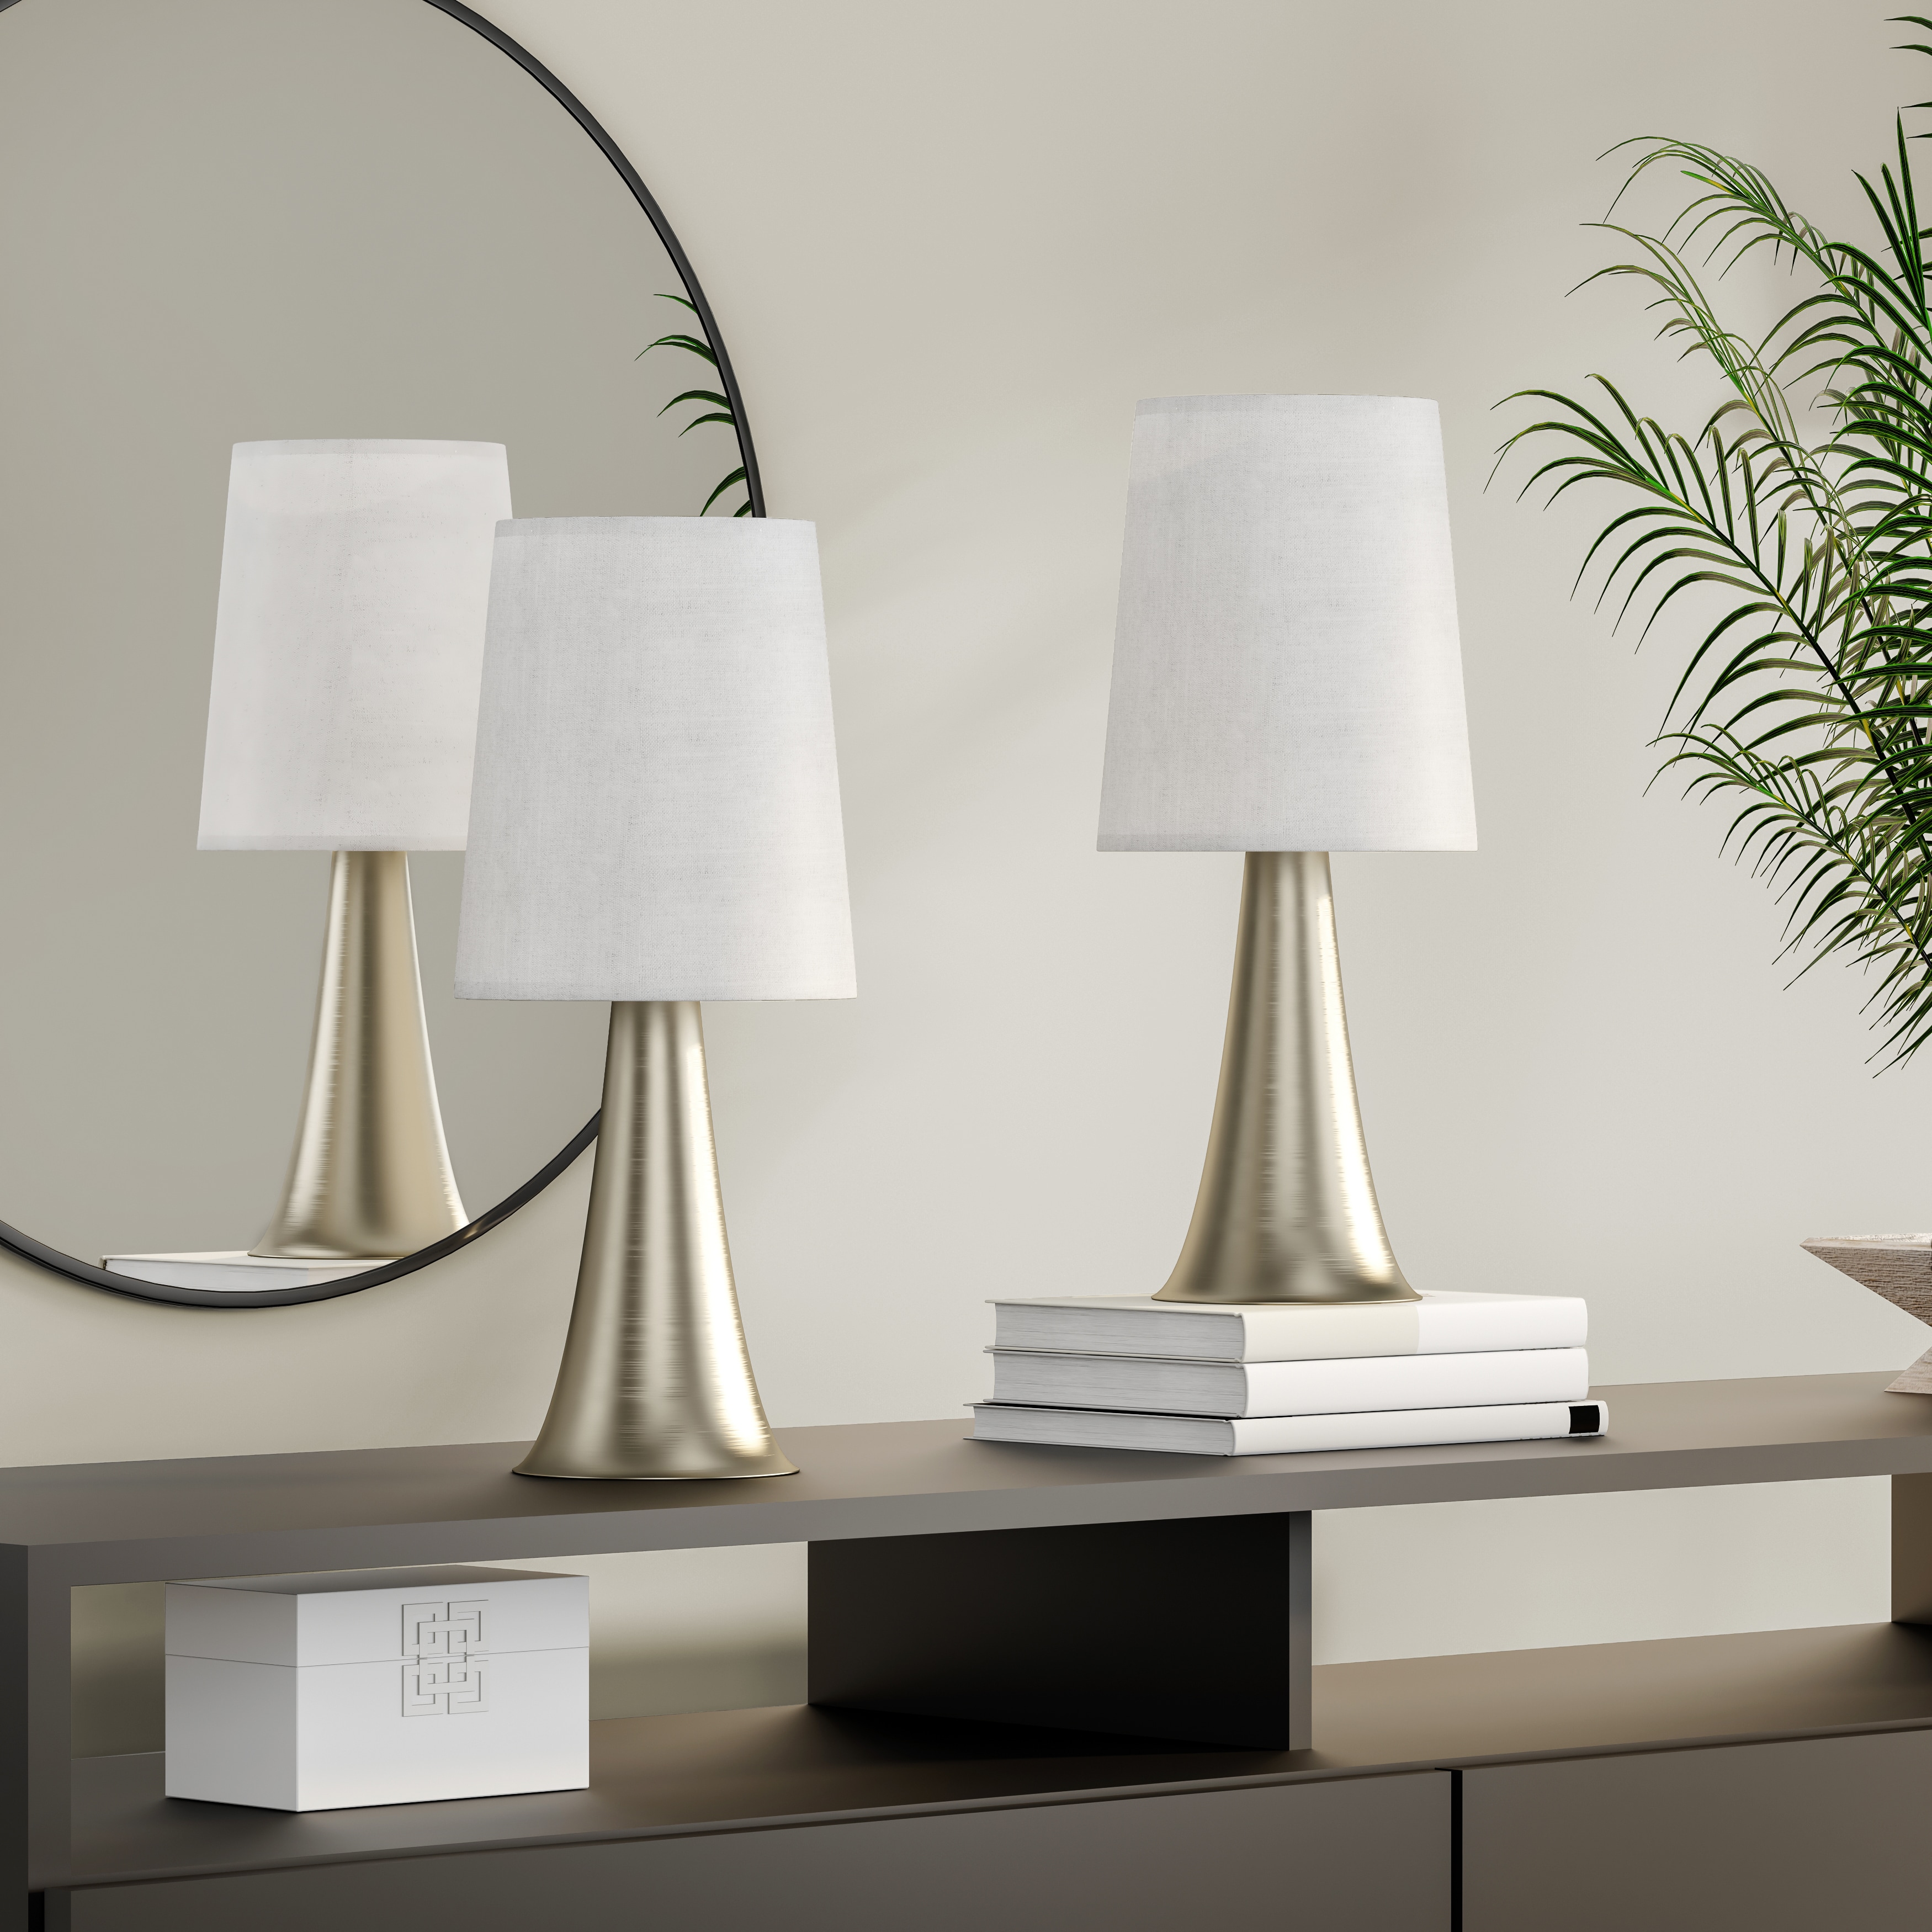 touch table lamps under 20 inches